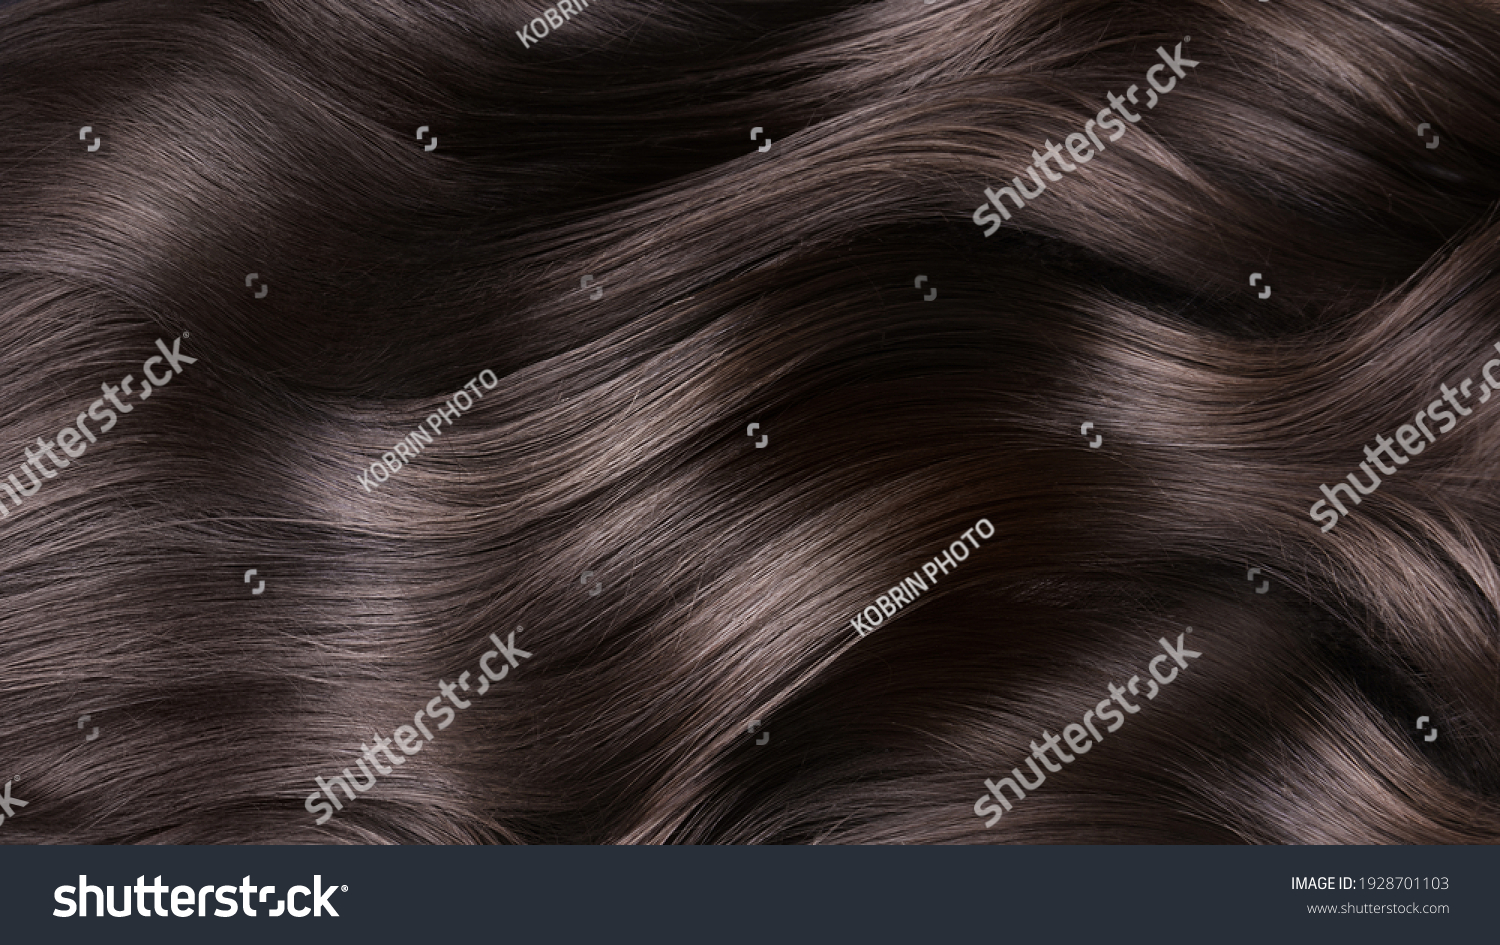 A closeup view of a bunch of shiny curls brown hair. #1928701103